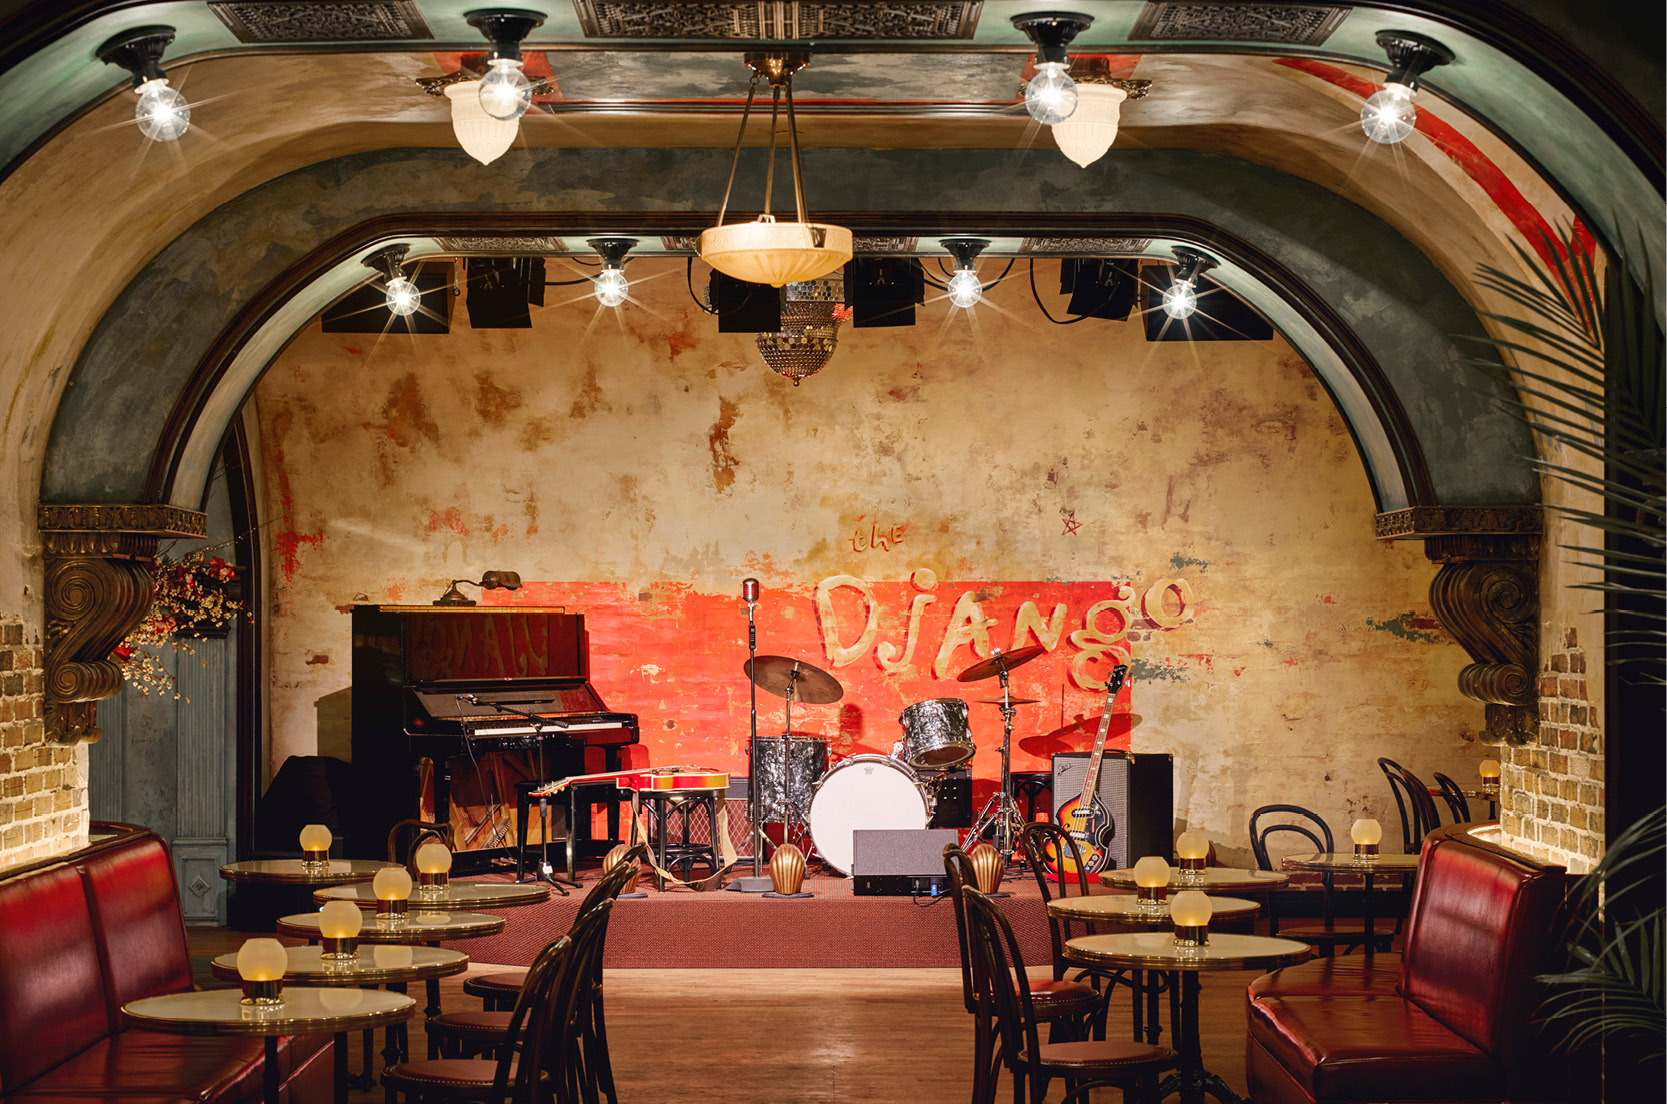 The Django stage with all its instruments including a piano, a drum set and a guitar. There are candlelit tables lining the room